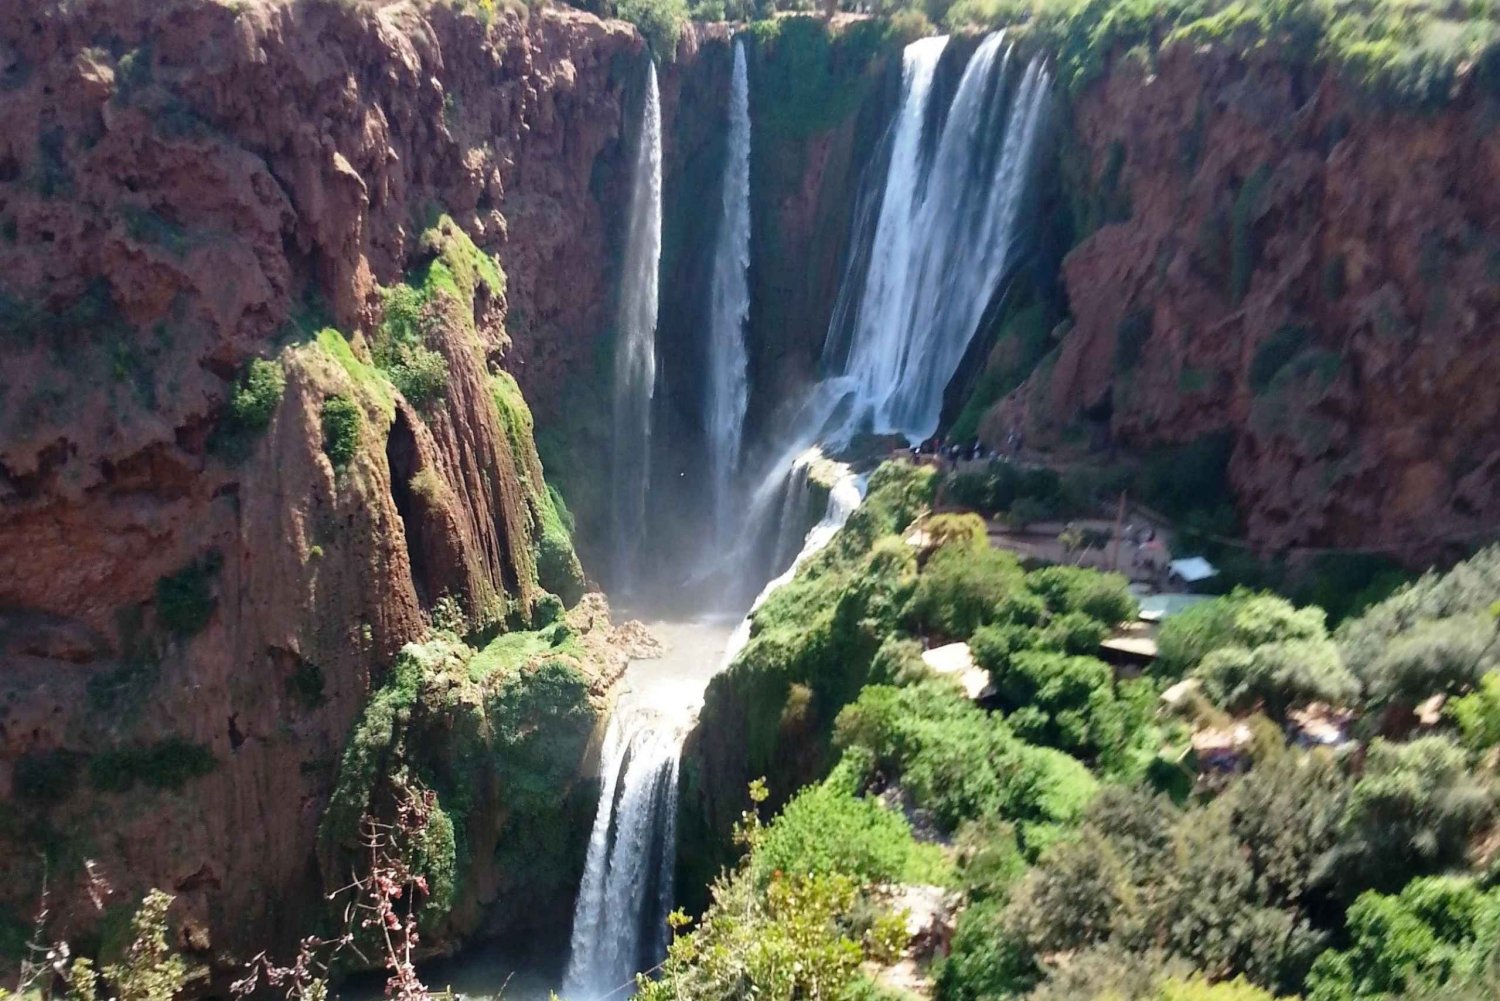 Day Trip to Ouzoud WaterFalls from Marrakech: Shared